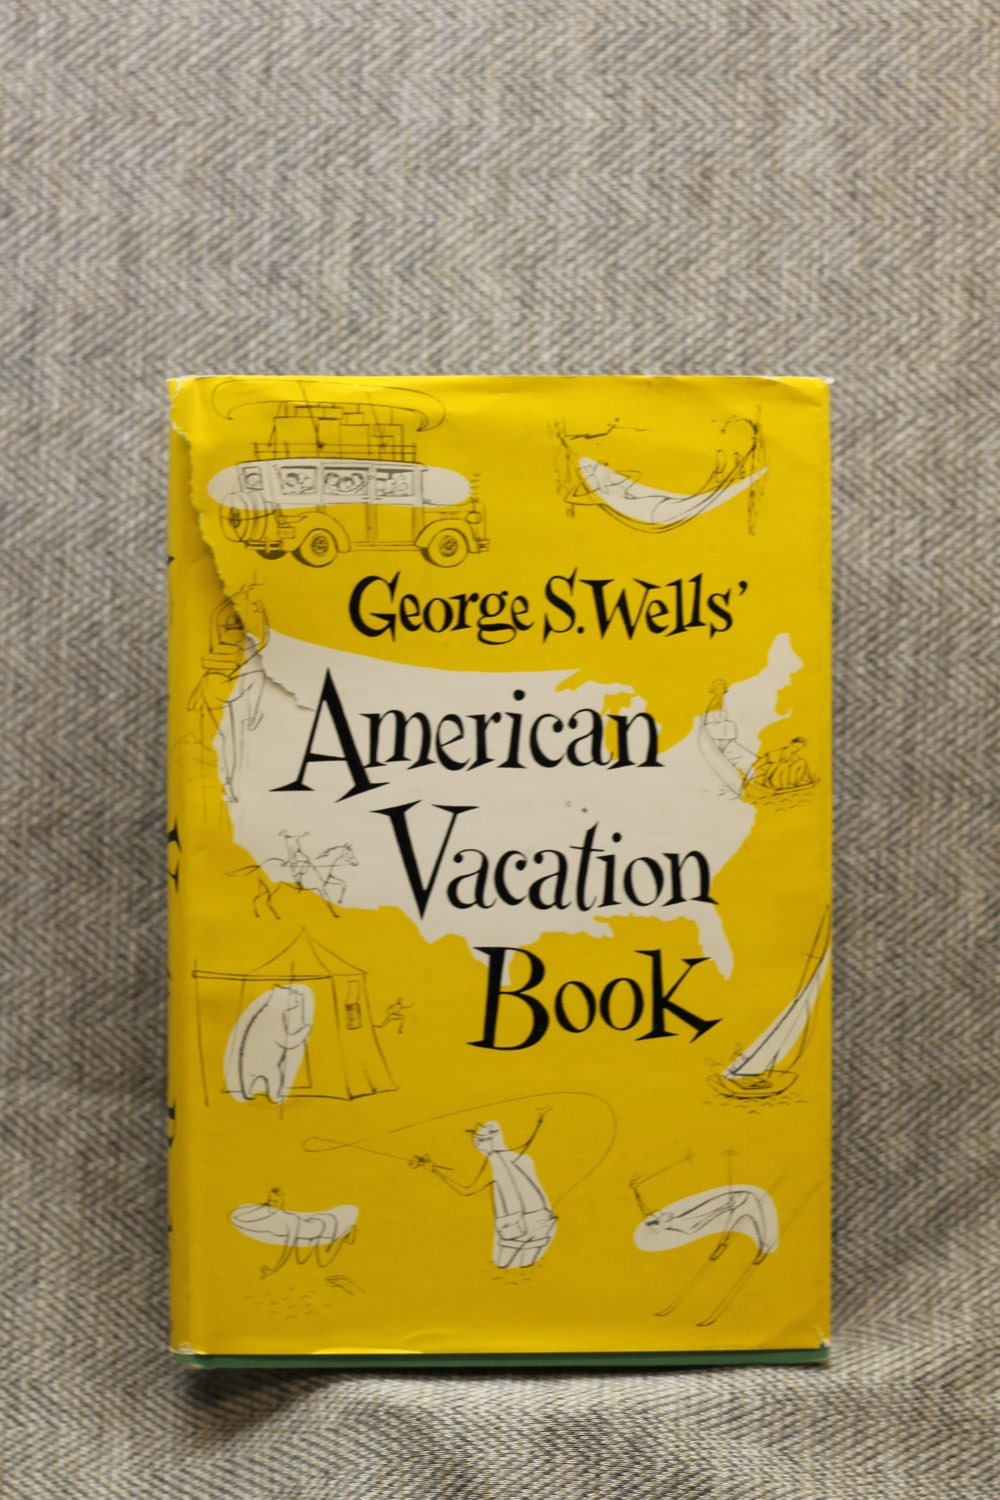 George S. Wells' American Vacation Book George S. Wells